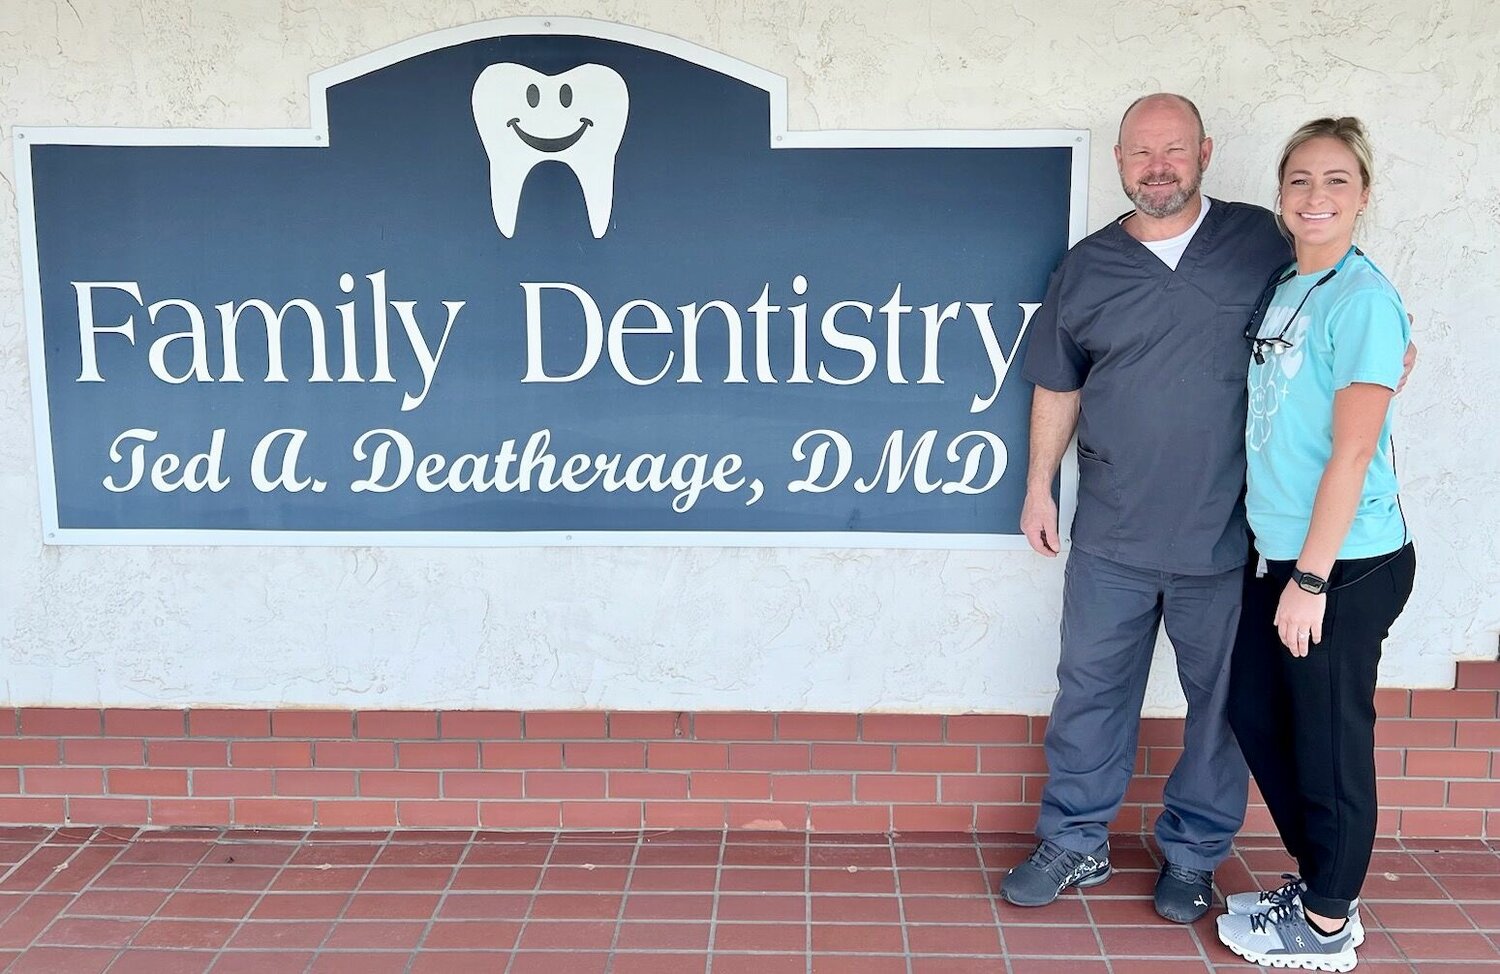 Dr. Ted Deatherage, left, welcomes his daughter, dental hygienist Corey Deatherage, to his dental practice.